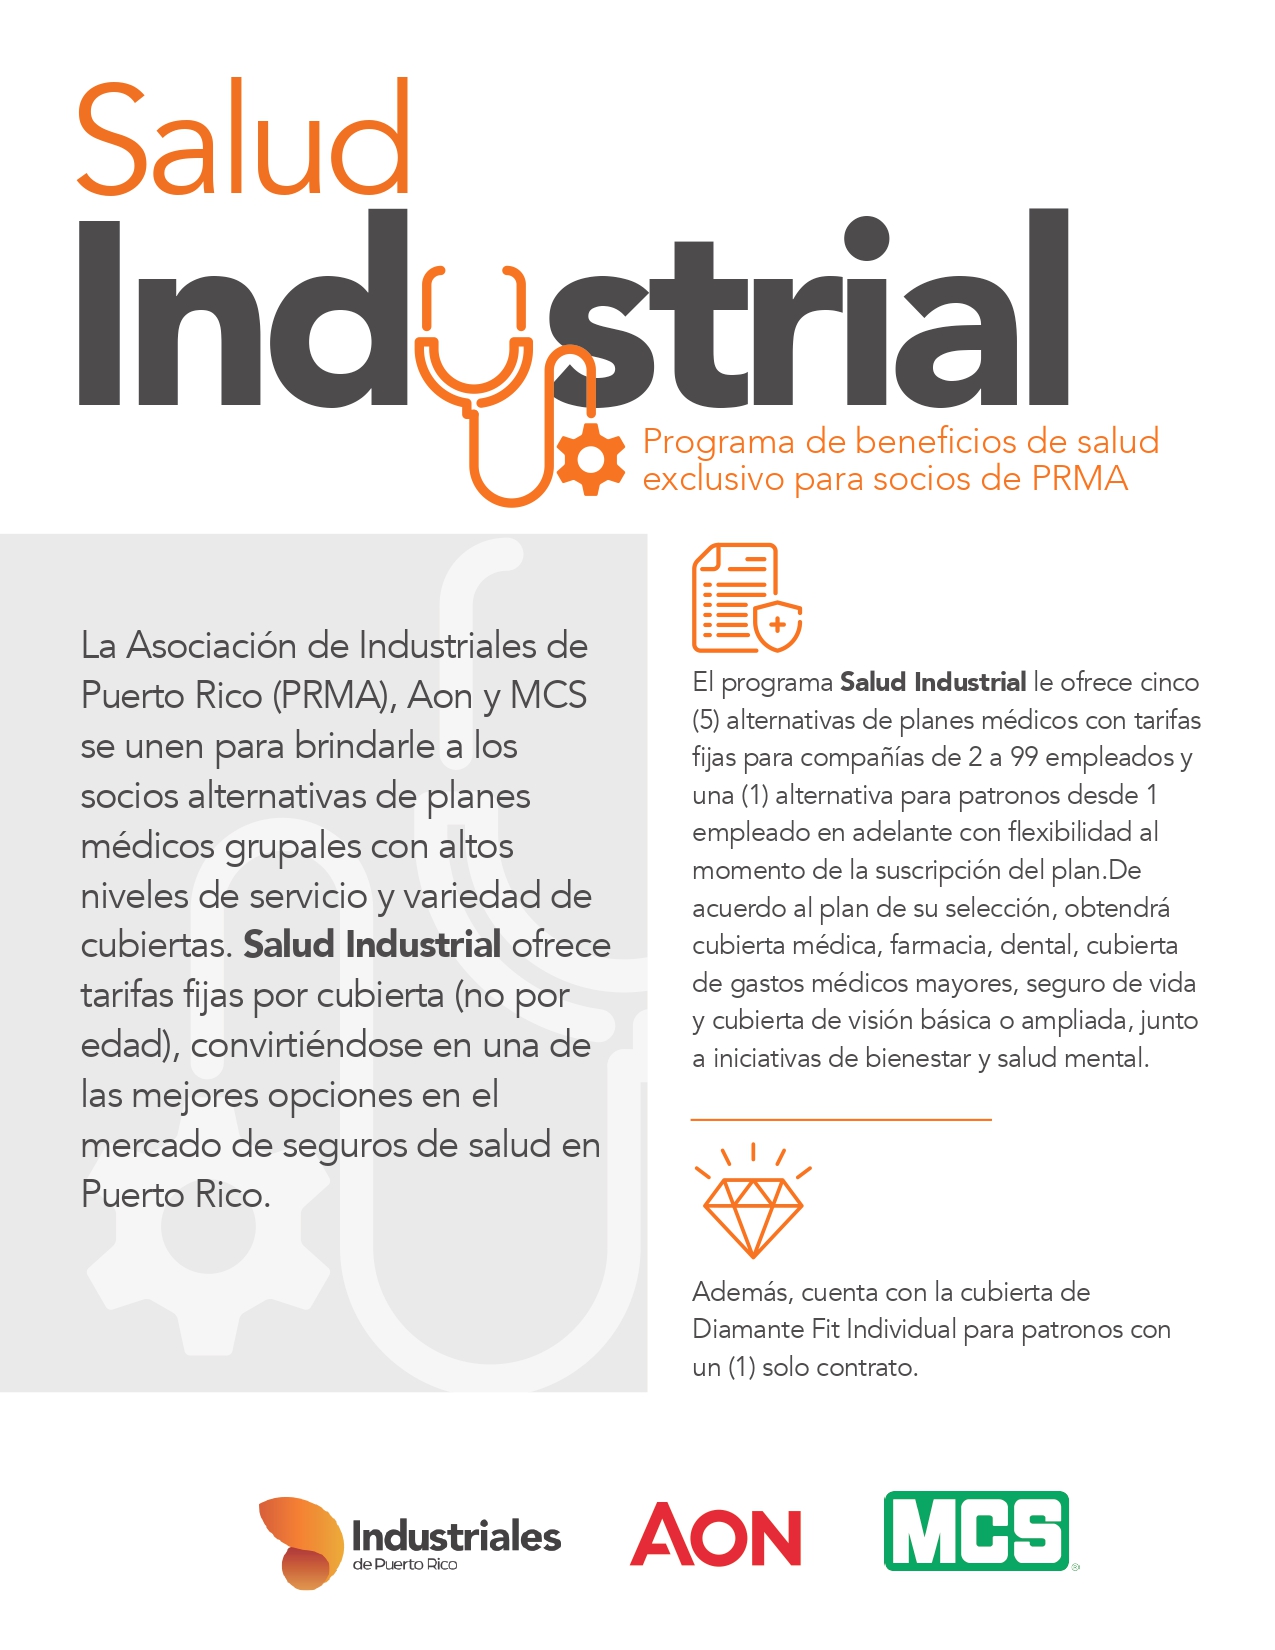 PRMA-Aon Salud Industrial FLYER RV NEW copy_pages-to-jpg-0001